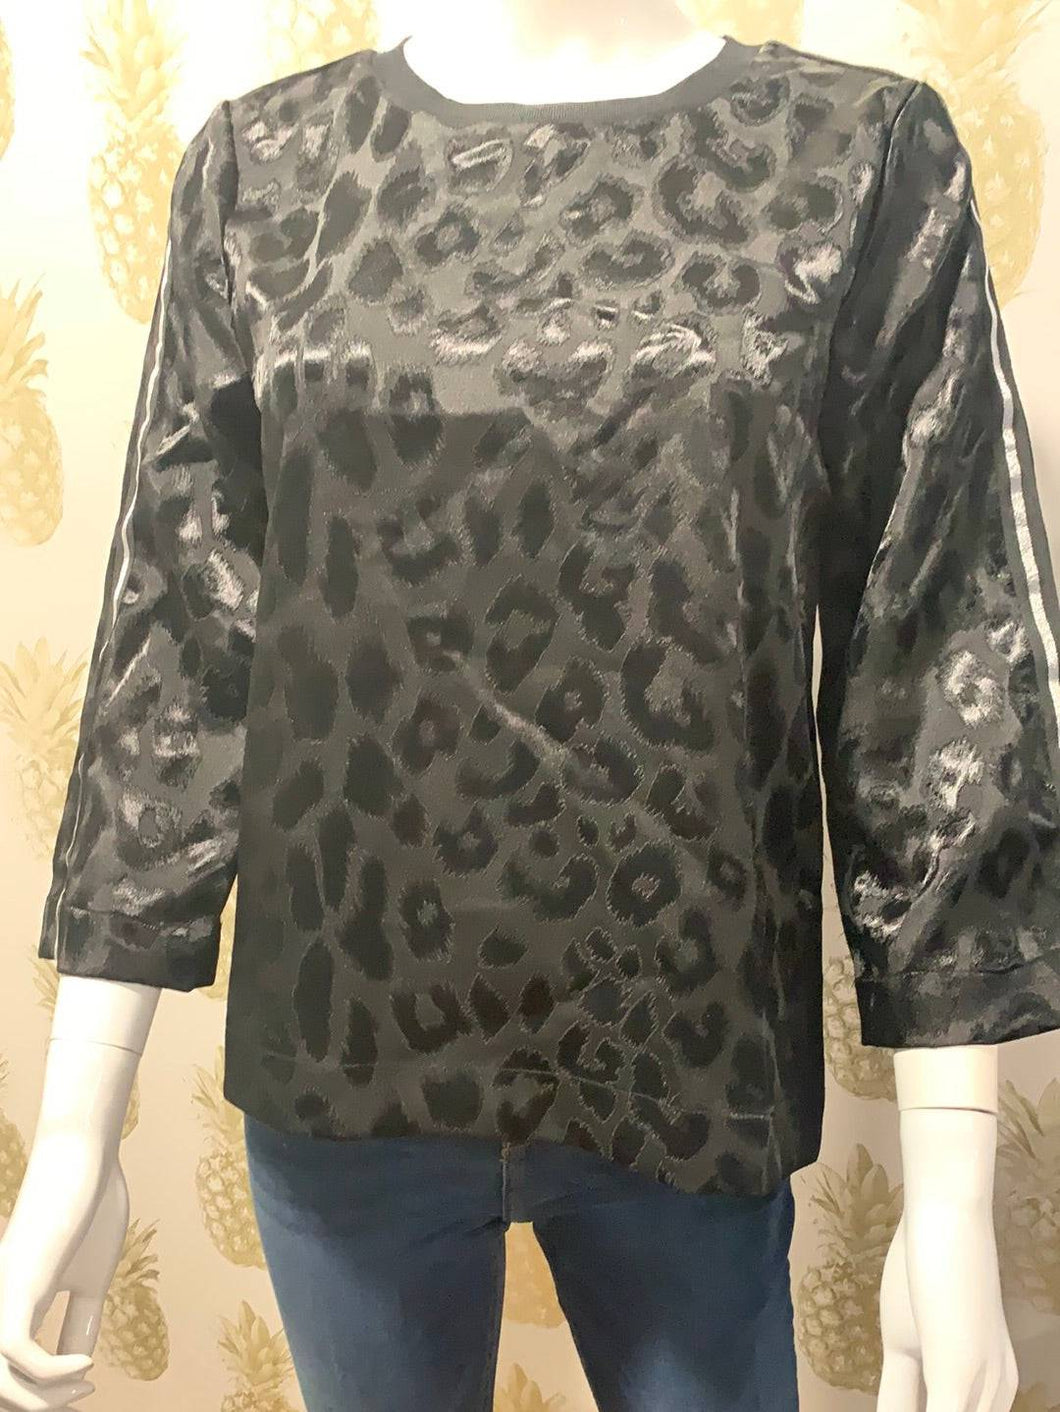 Leopard jacquard loose fit woven top with silver trim sleeve